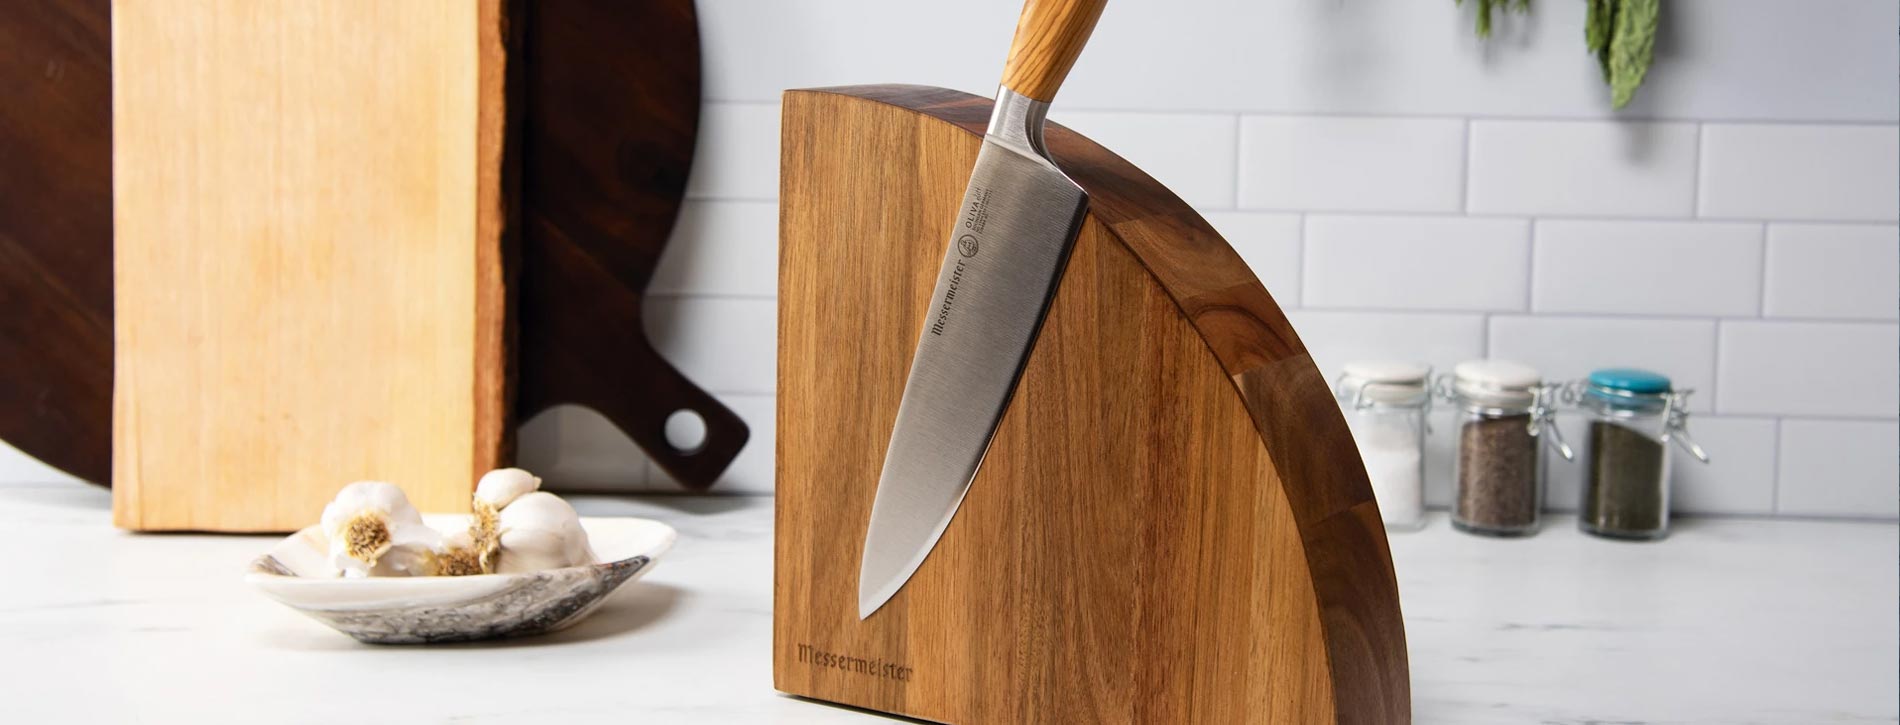 6 Must-Dos for Taking Care of Knives